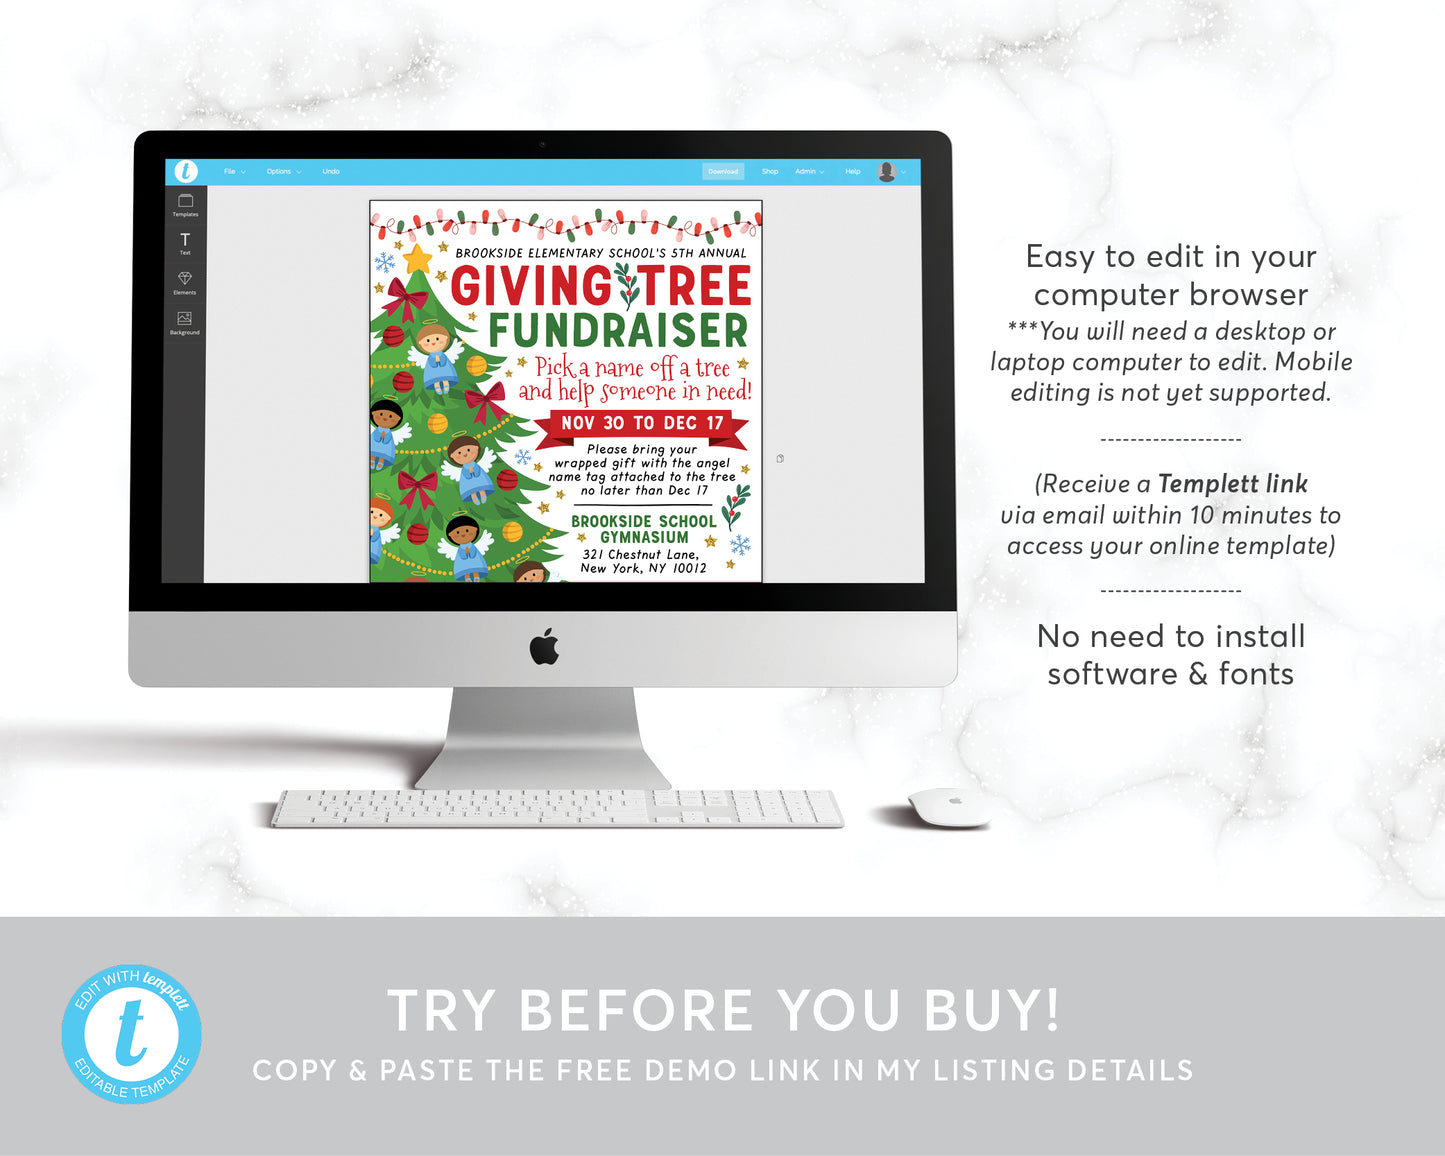 Christmas Giving Tree With Angels Fundraiser Flyer Editable Template, Charity Nonprofit Toy Drive Community Xmas Event Church School PTO PTA